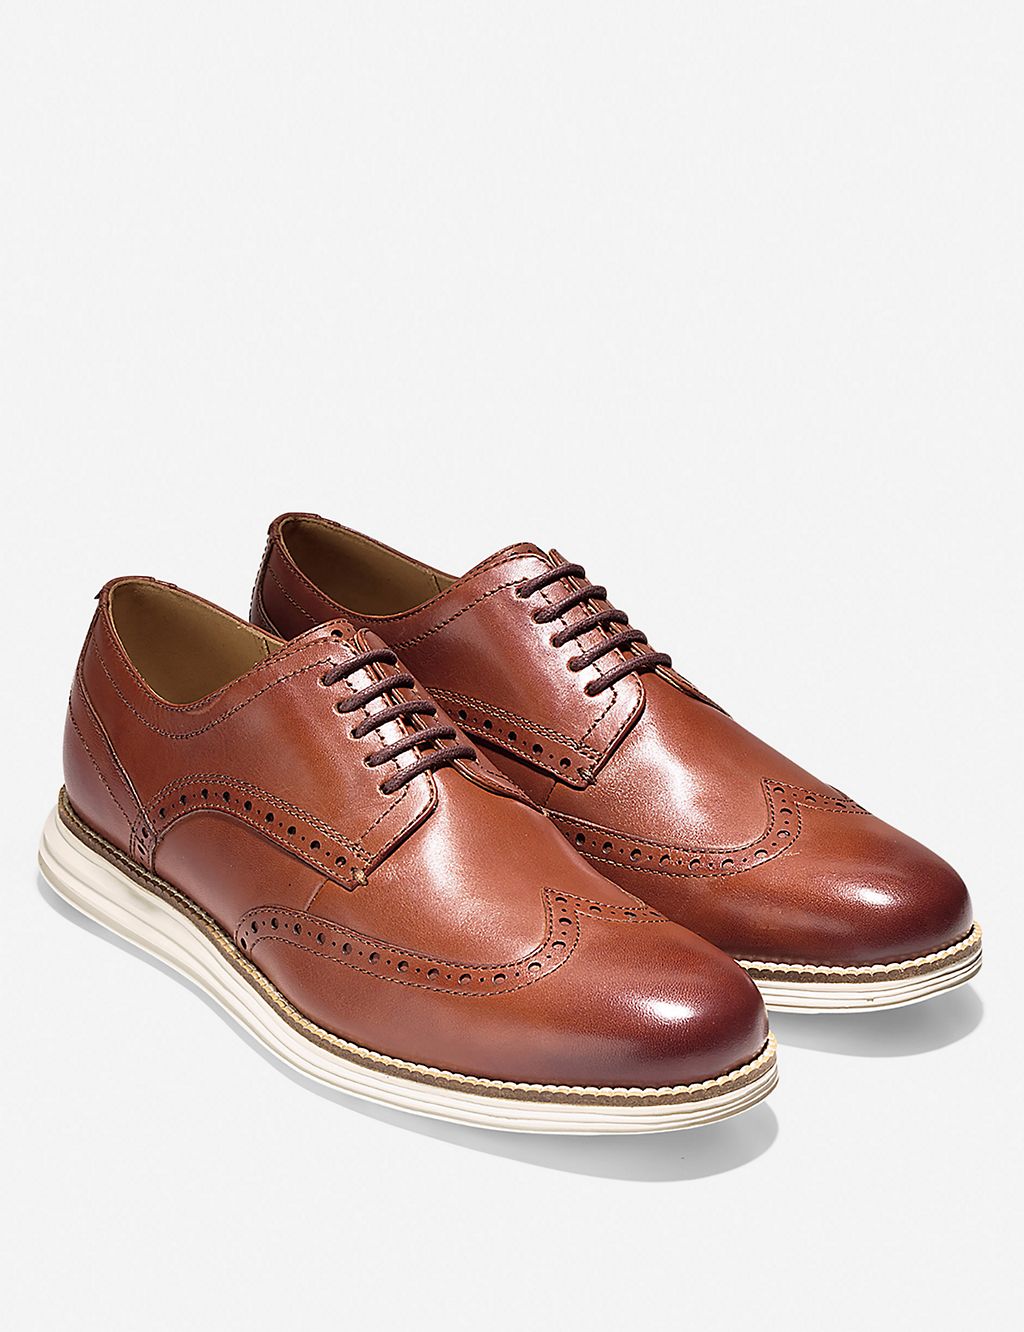 Originalgrand Wide Fit Leather Oxford Shoes 1 of 5